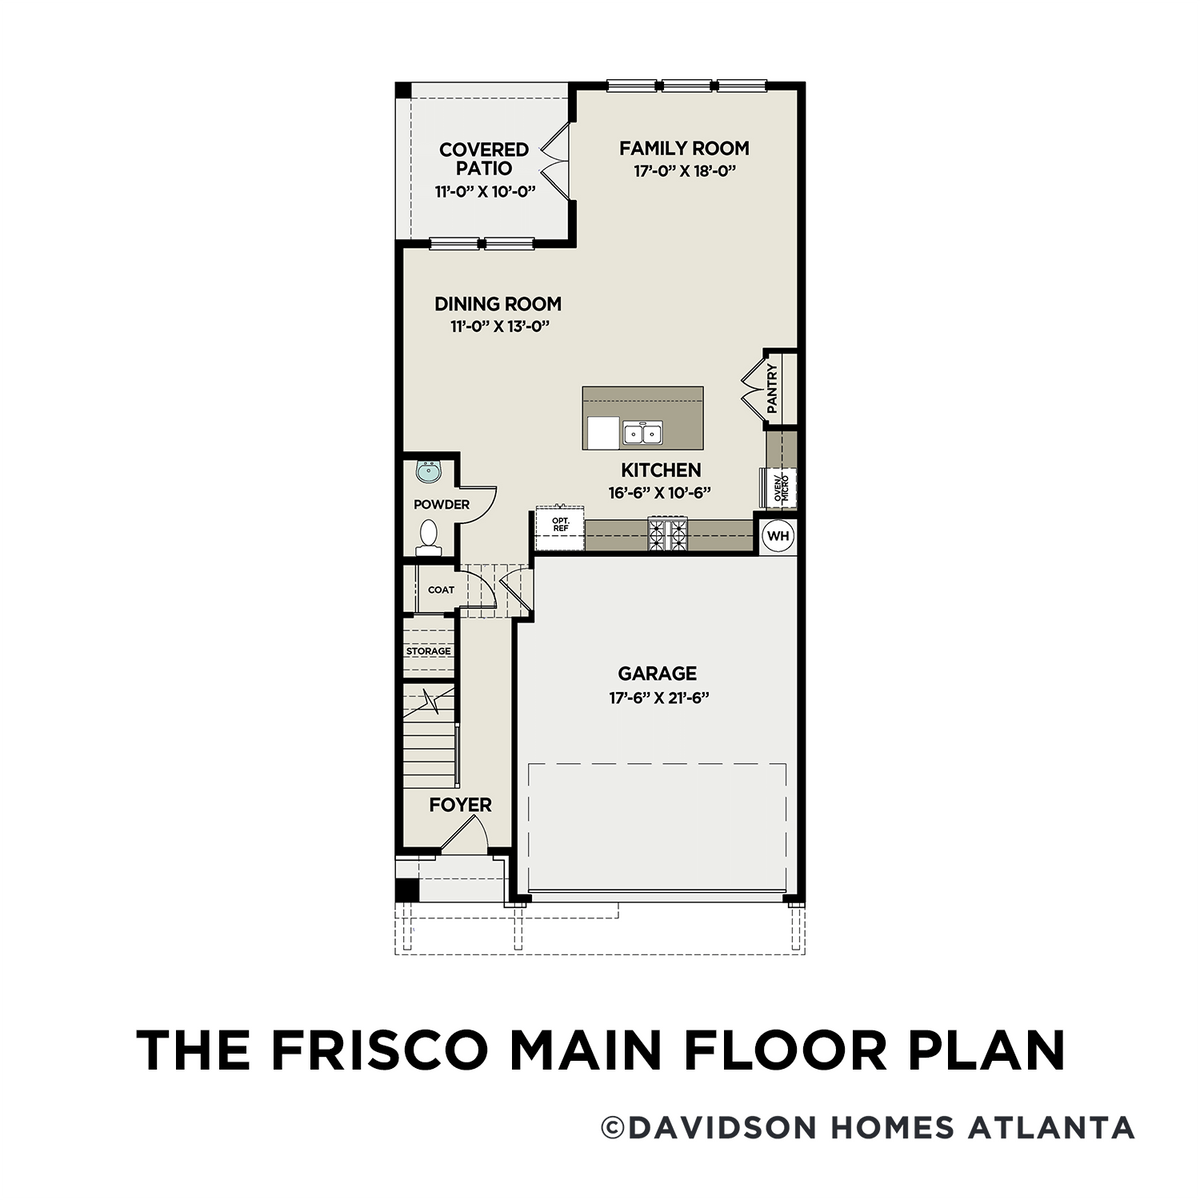 1 - The Frisco A floor plan layout for 120 Batten Board Way in Davidson Homes' The Village at Towne Lake community.